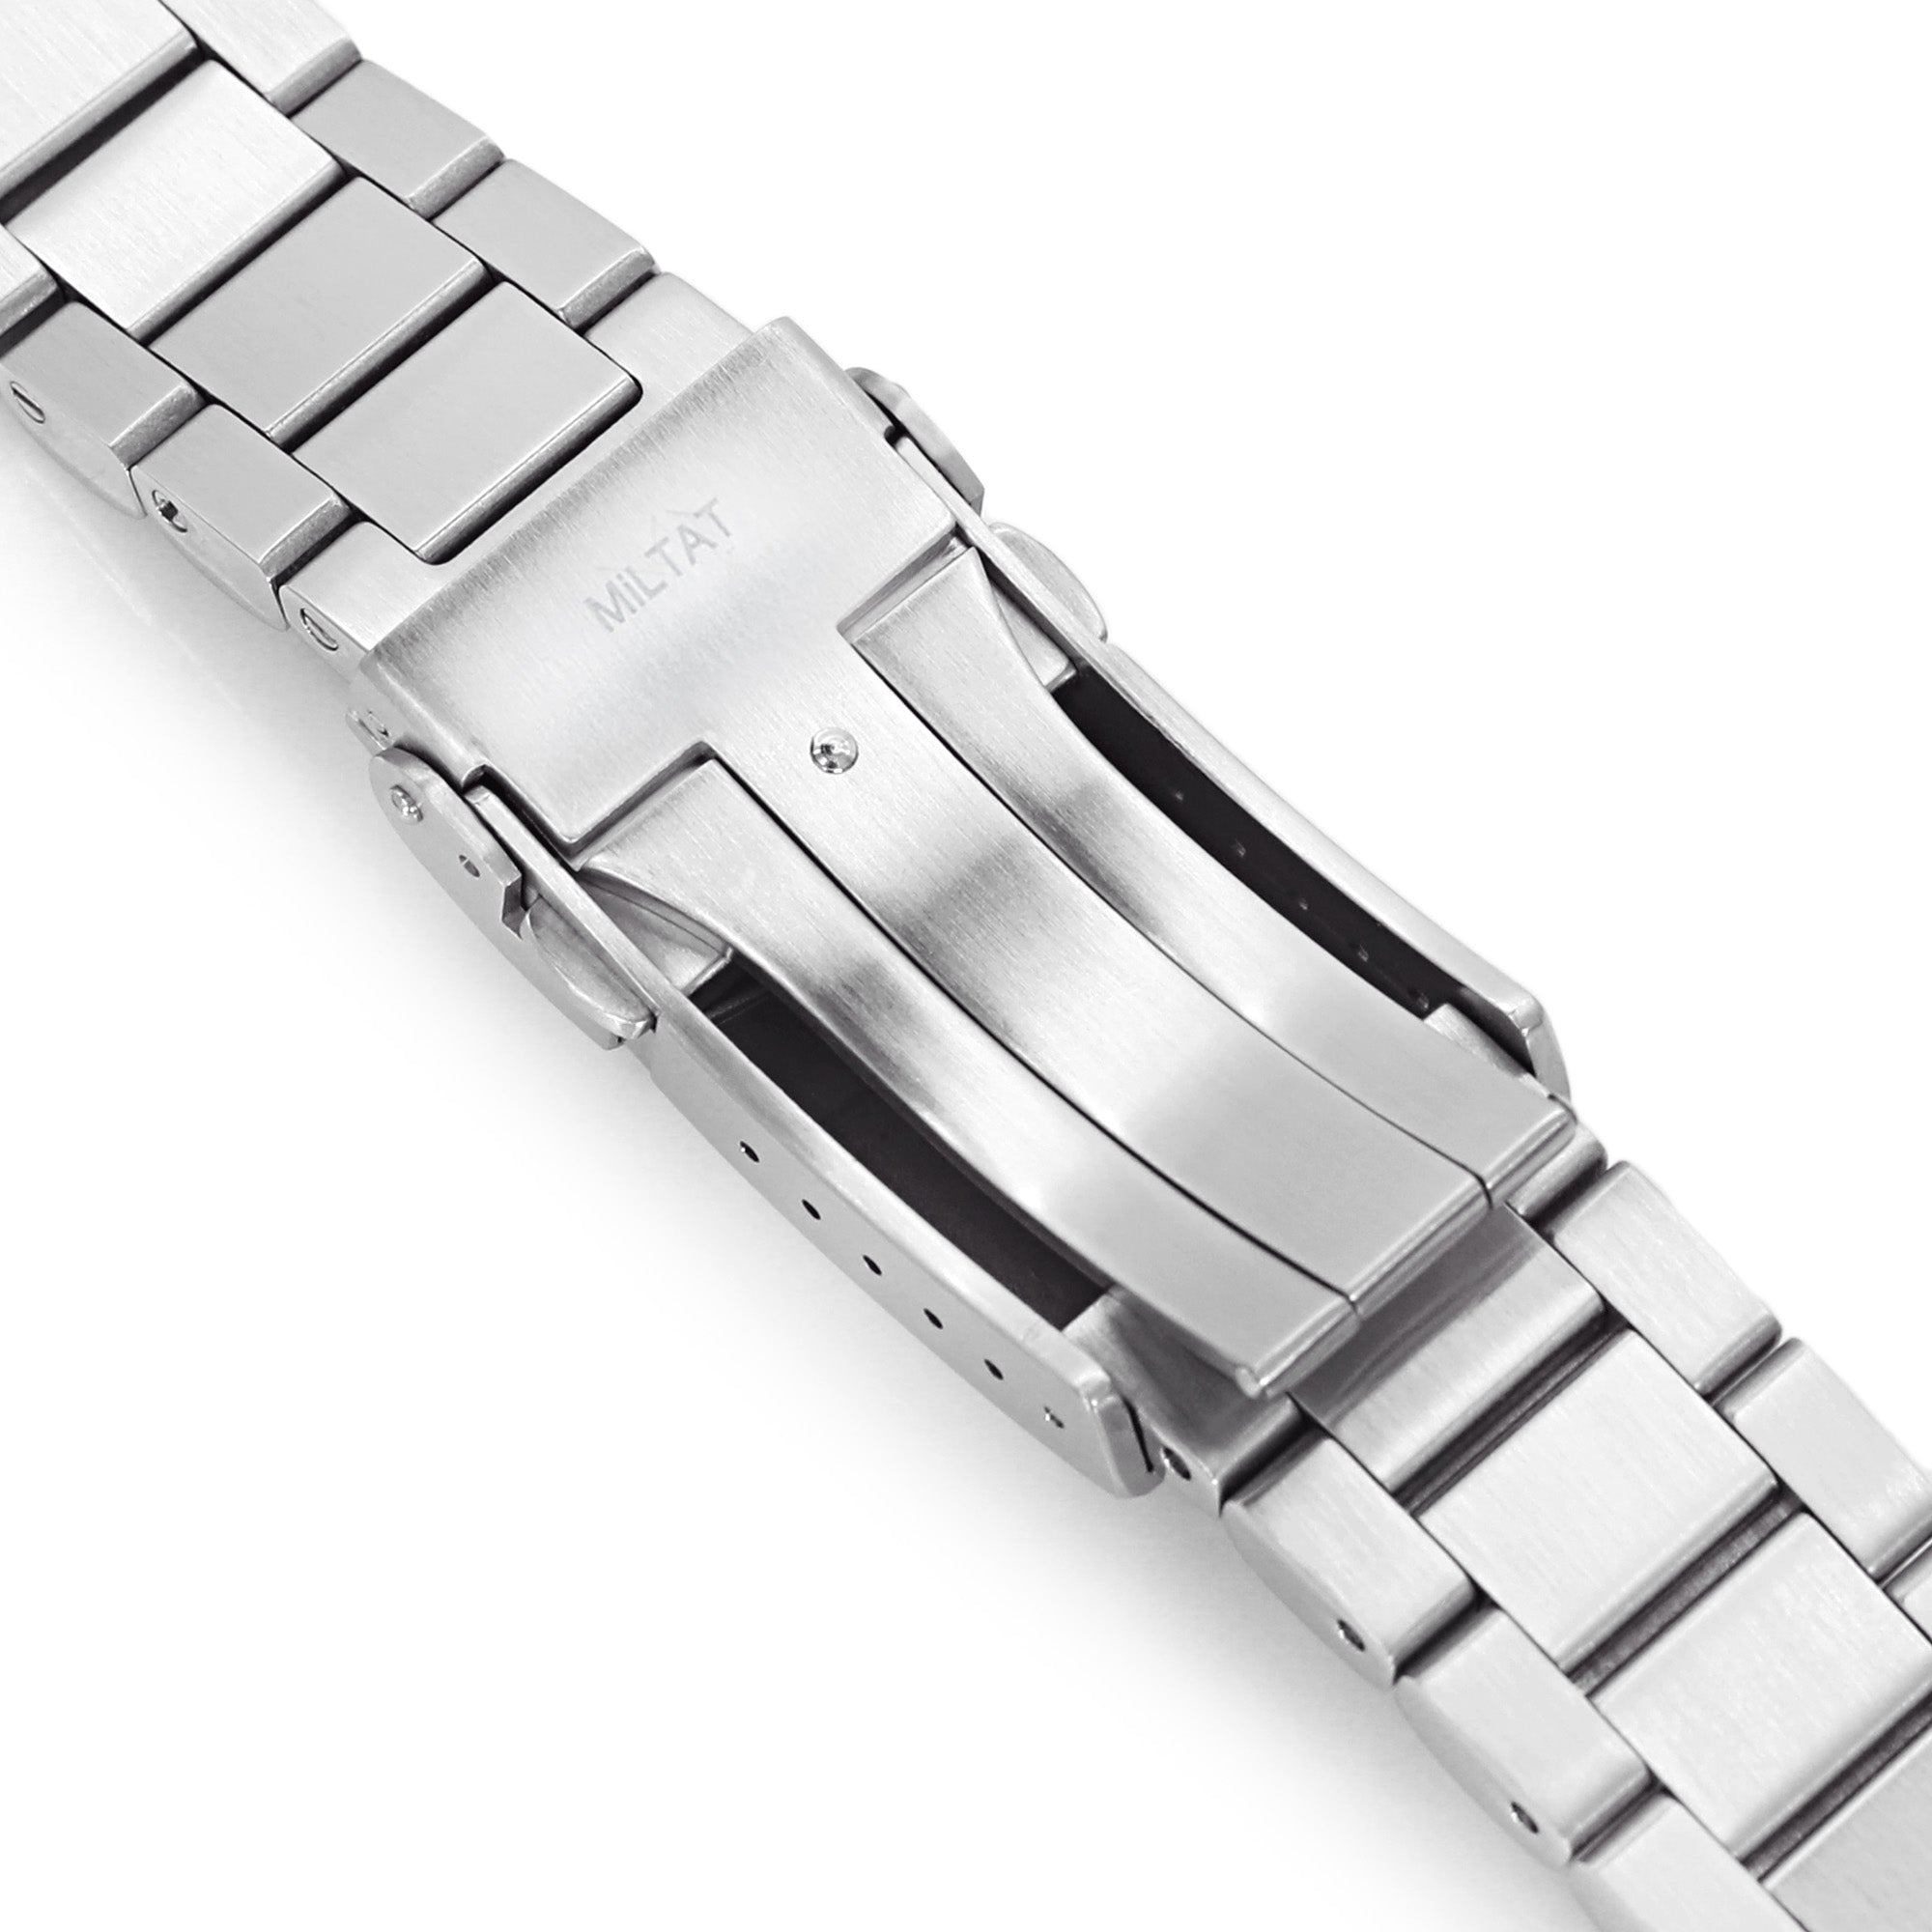 22mm Bandoleer 316L Stainless Steel Watch Bracelet for Seiko new Turtles SRP777 Brushed V-Clasp Strapcode Watch Bands